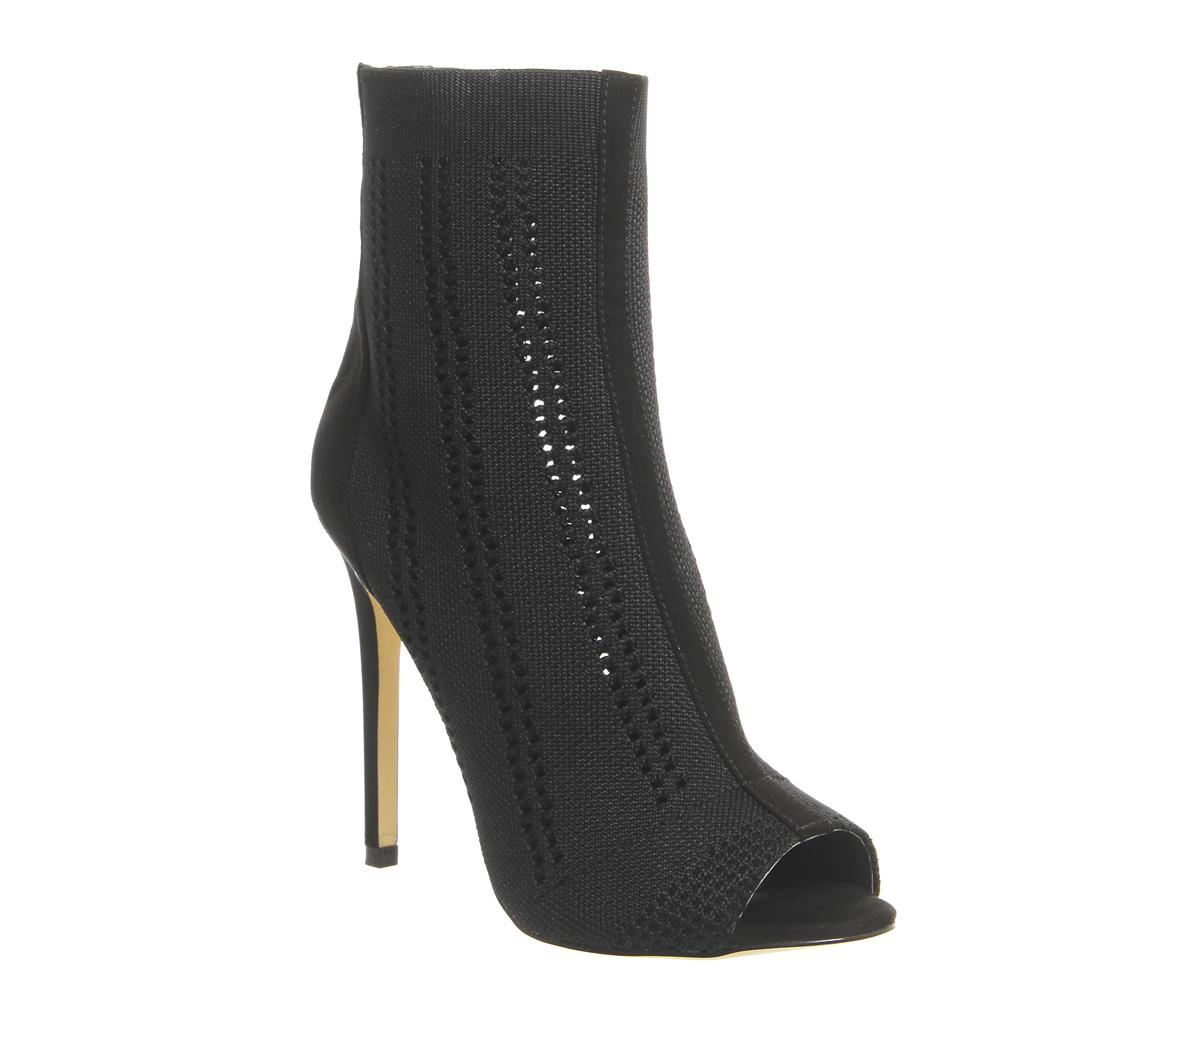 heeled boots with open toe